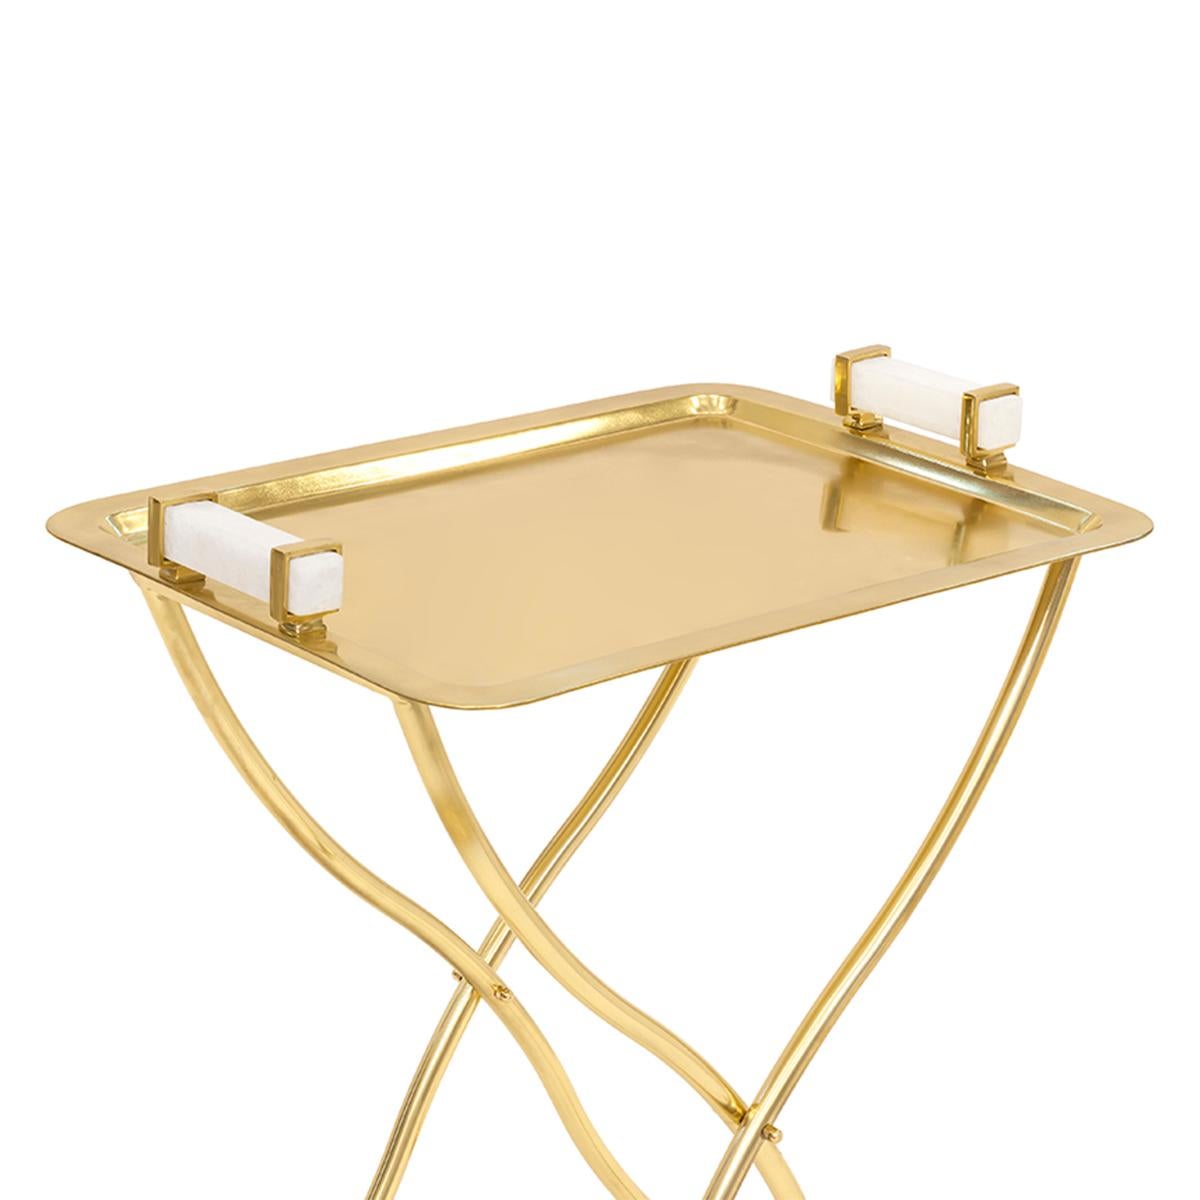 Butler tray corrugate gold in polished
gold finish with natural quartz handles.
Also available in polished chrome finish.